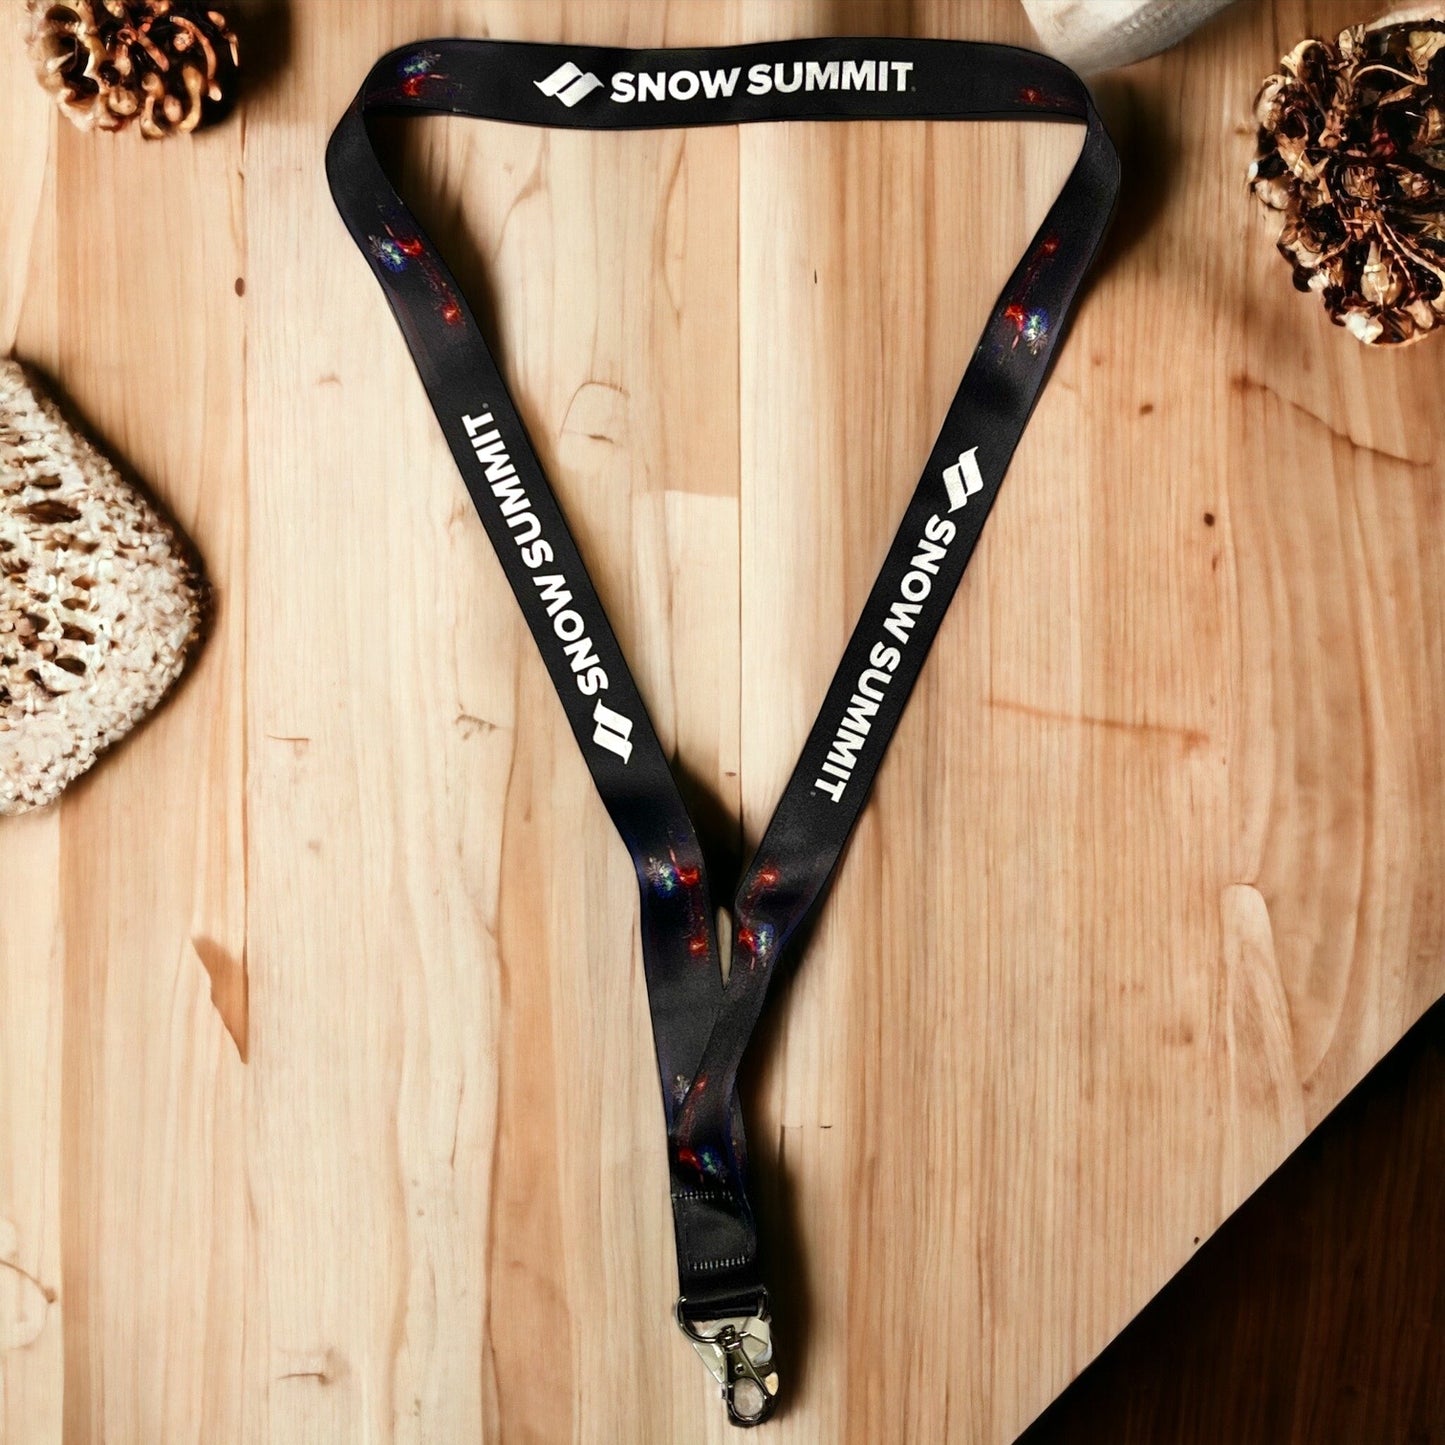 Black lanyard with white Snow Summit lettering and firework design.